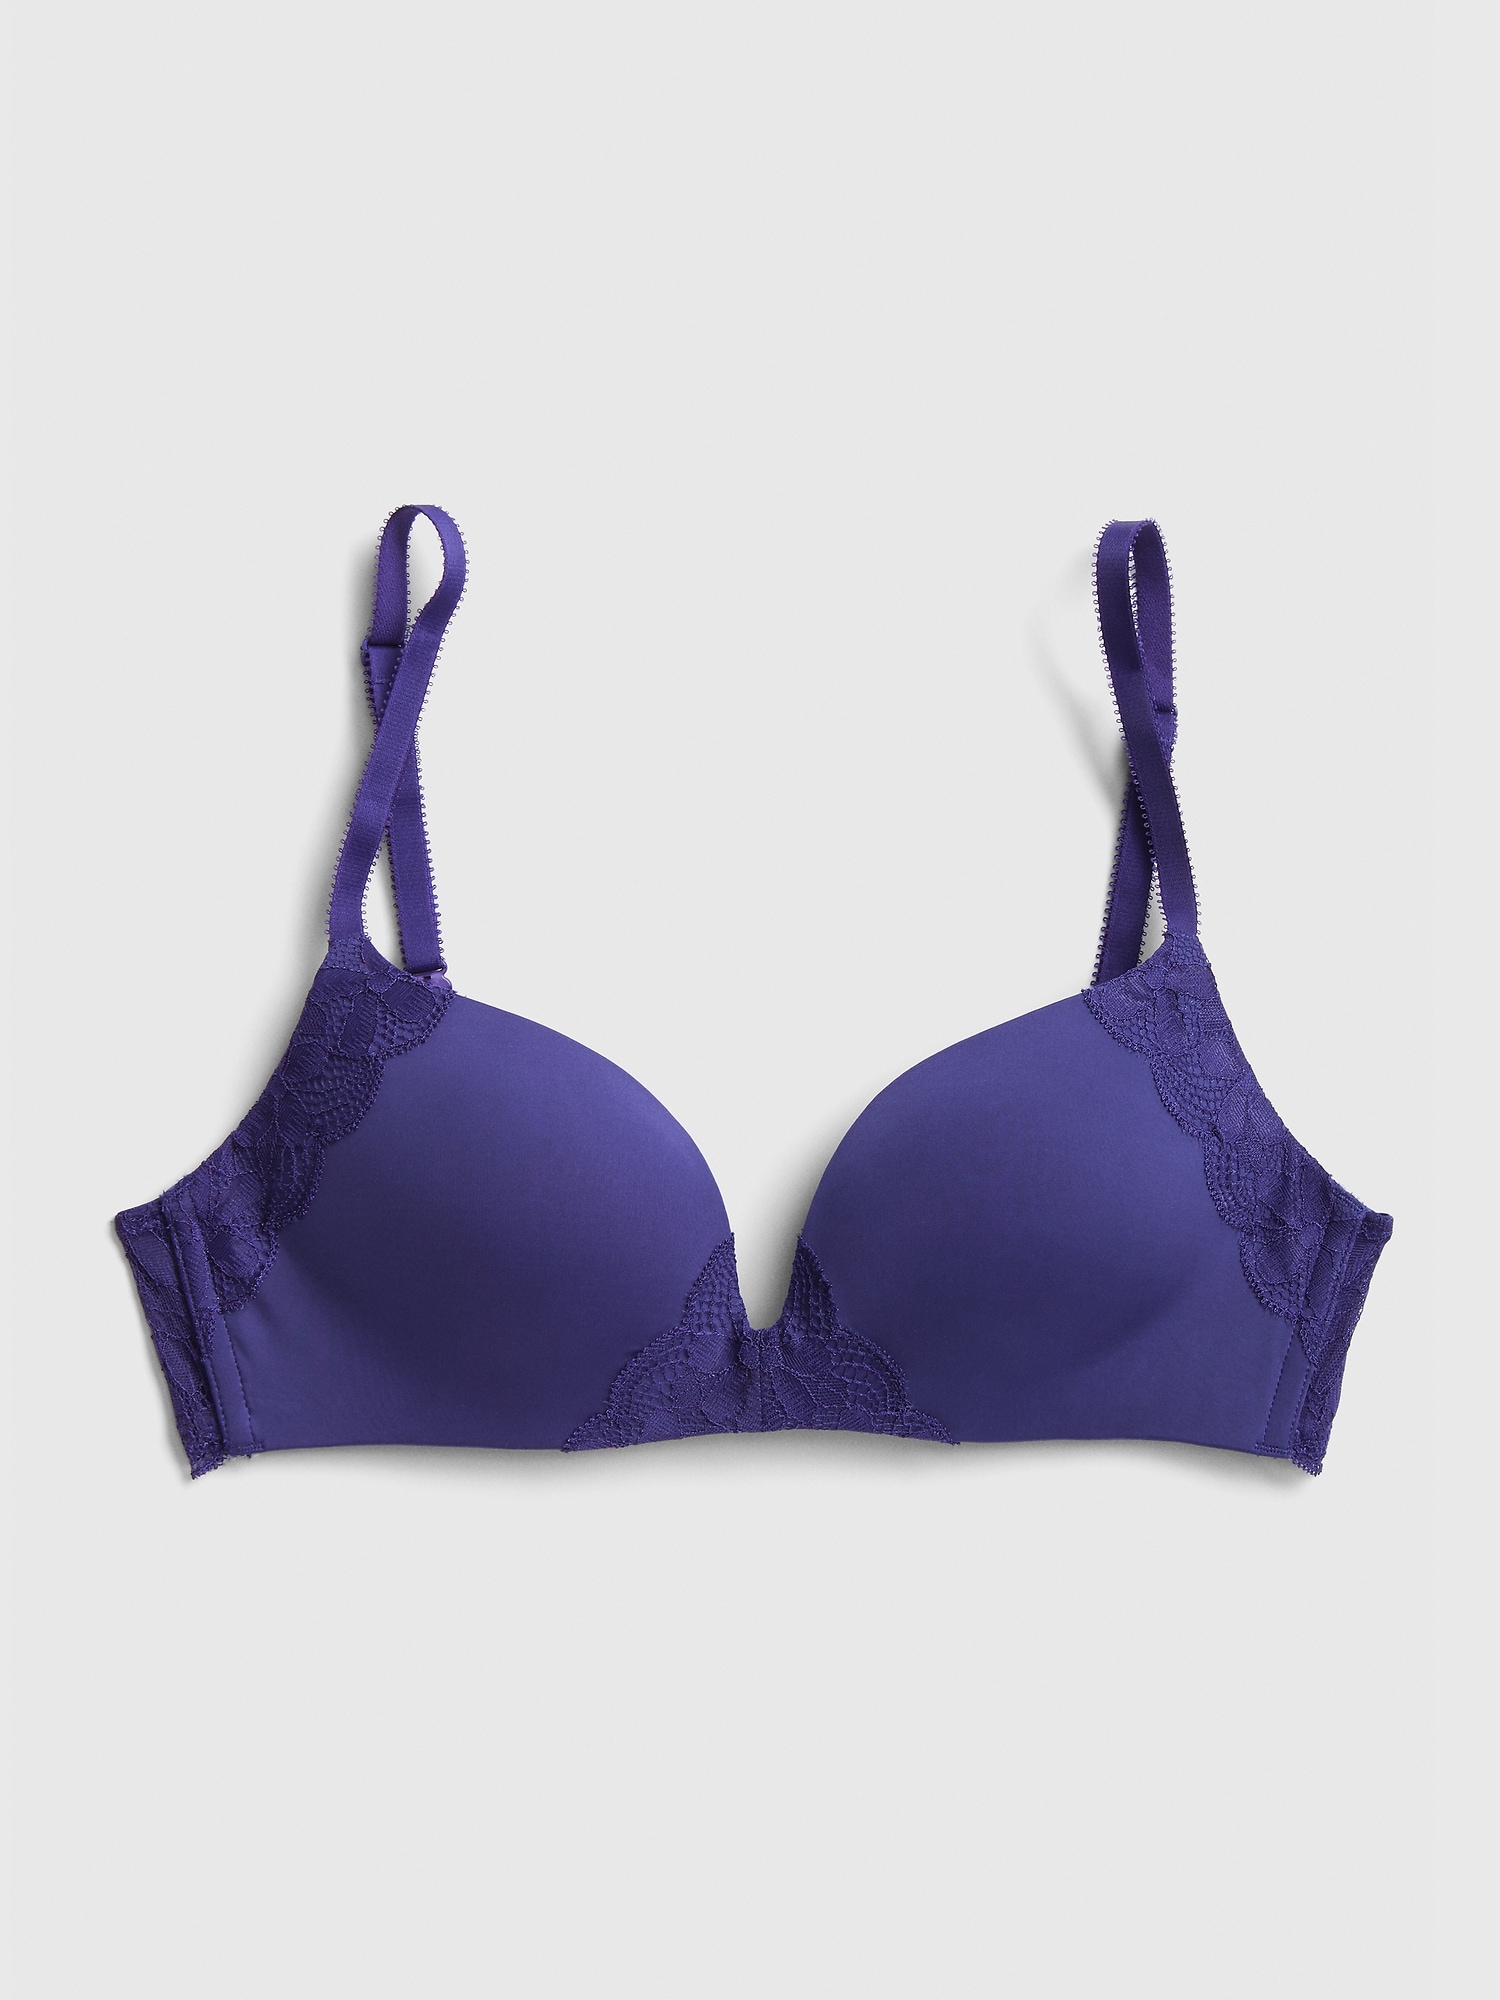 Ultimo's 'perfect' ICON uplift bra that feels as good as it looks